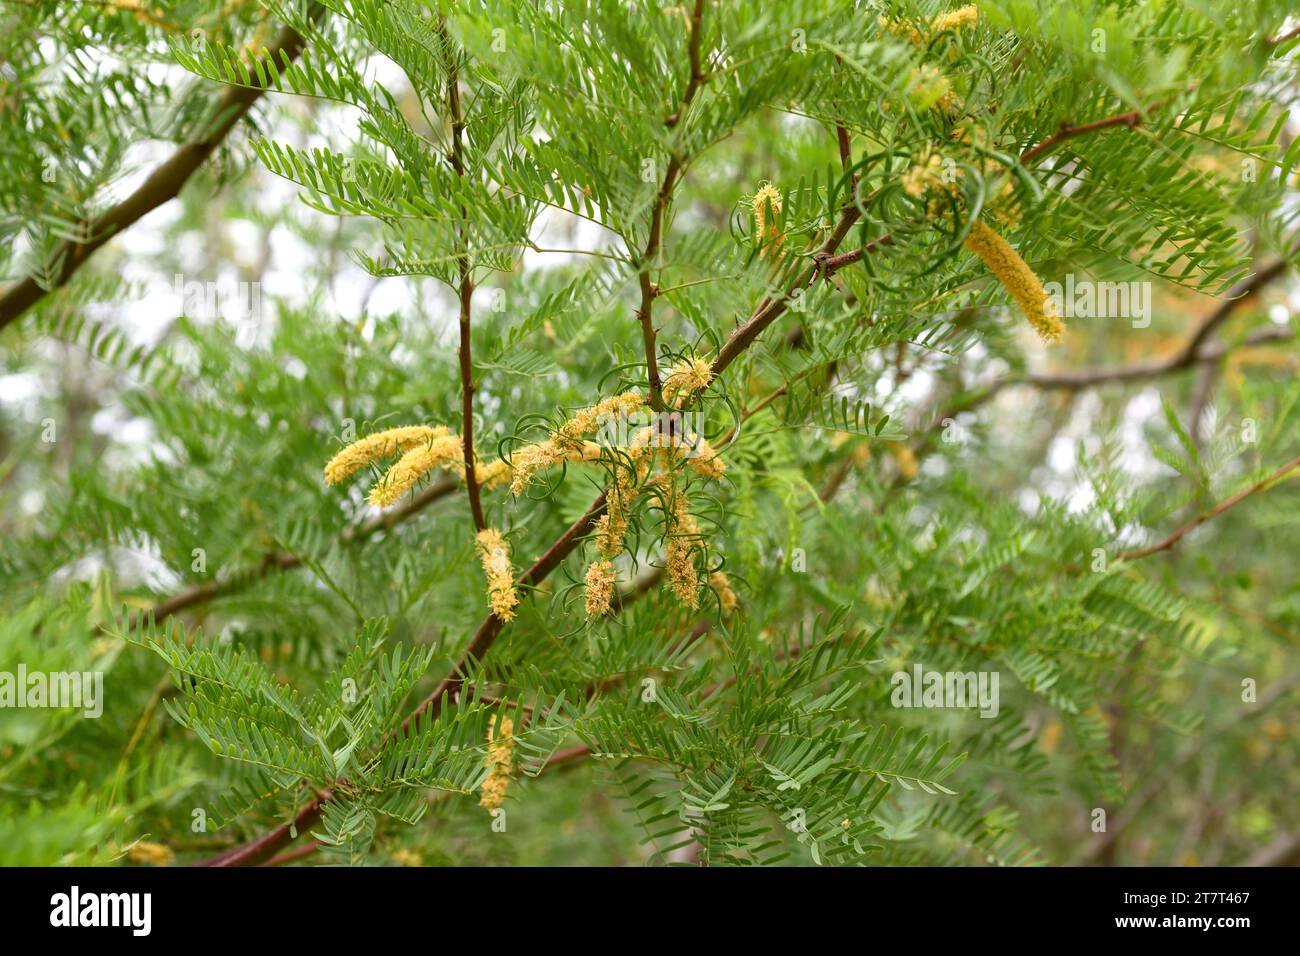 Honey mesquite (Prosopis glandulosa) is a spiny shrub or small tree native to southwestern United States and Mexico. Flowers and fruits detail. Stock Photo